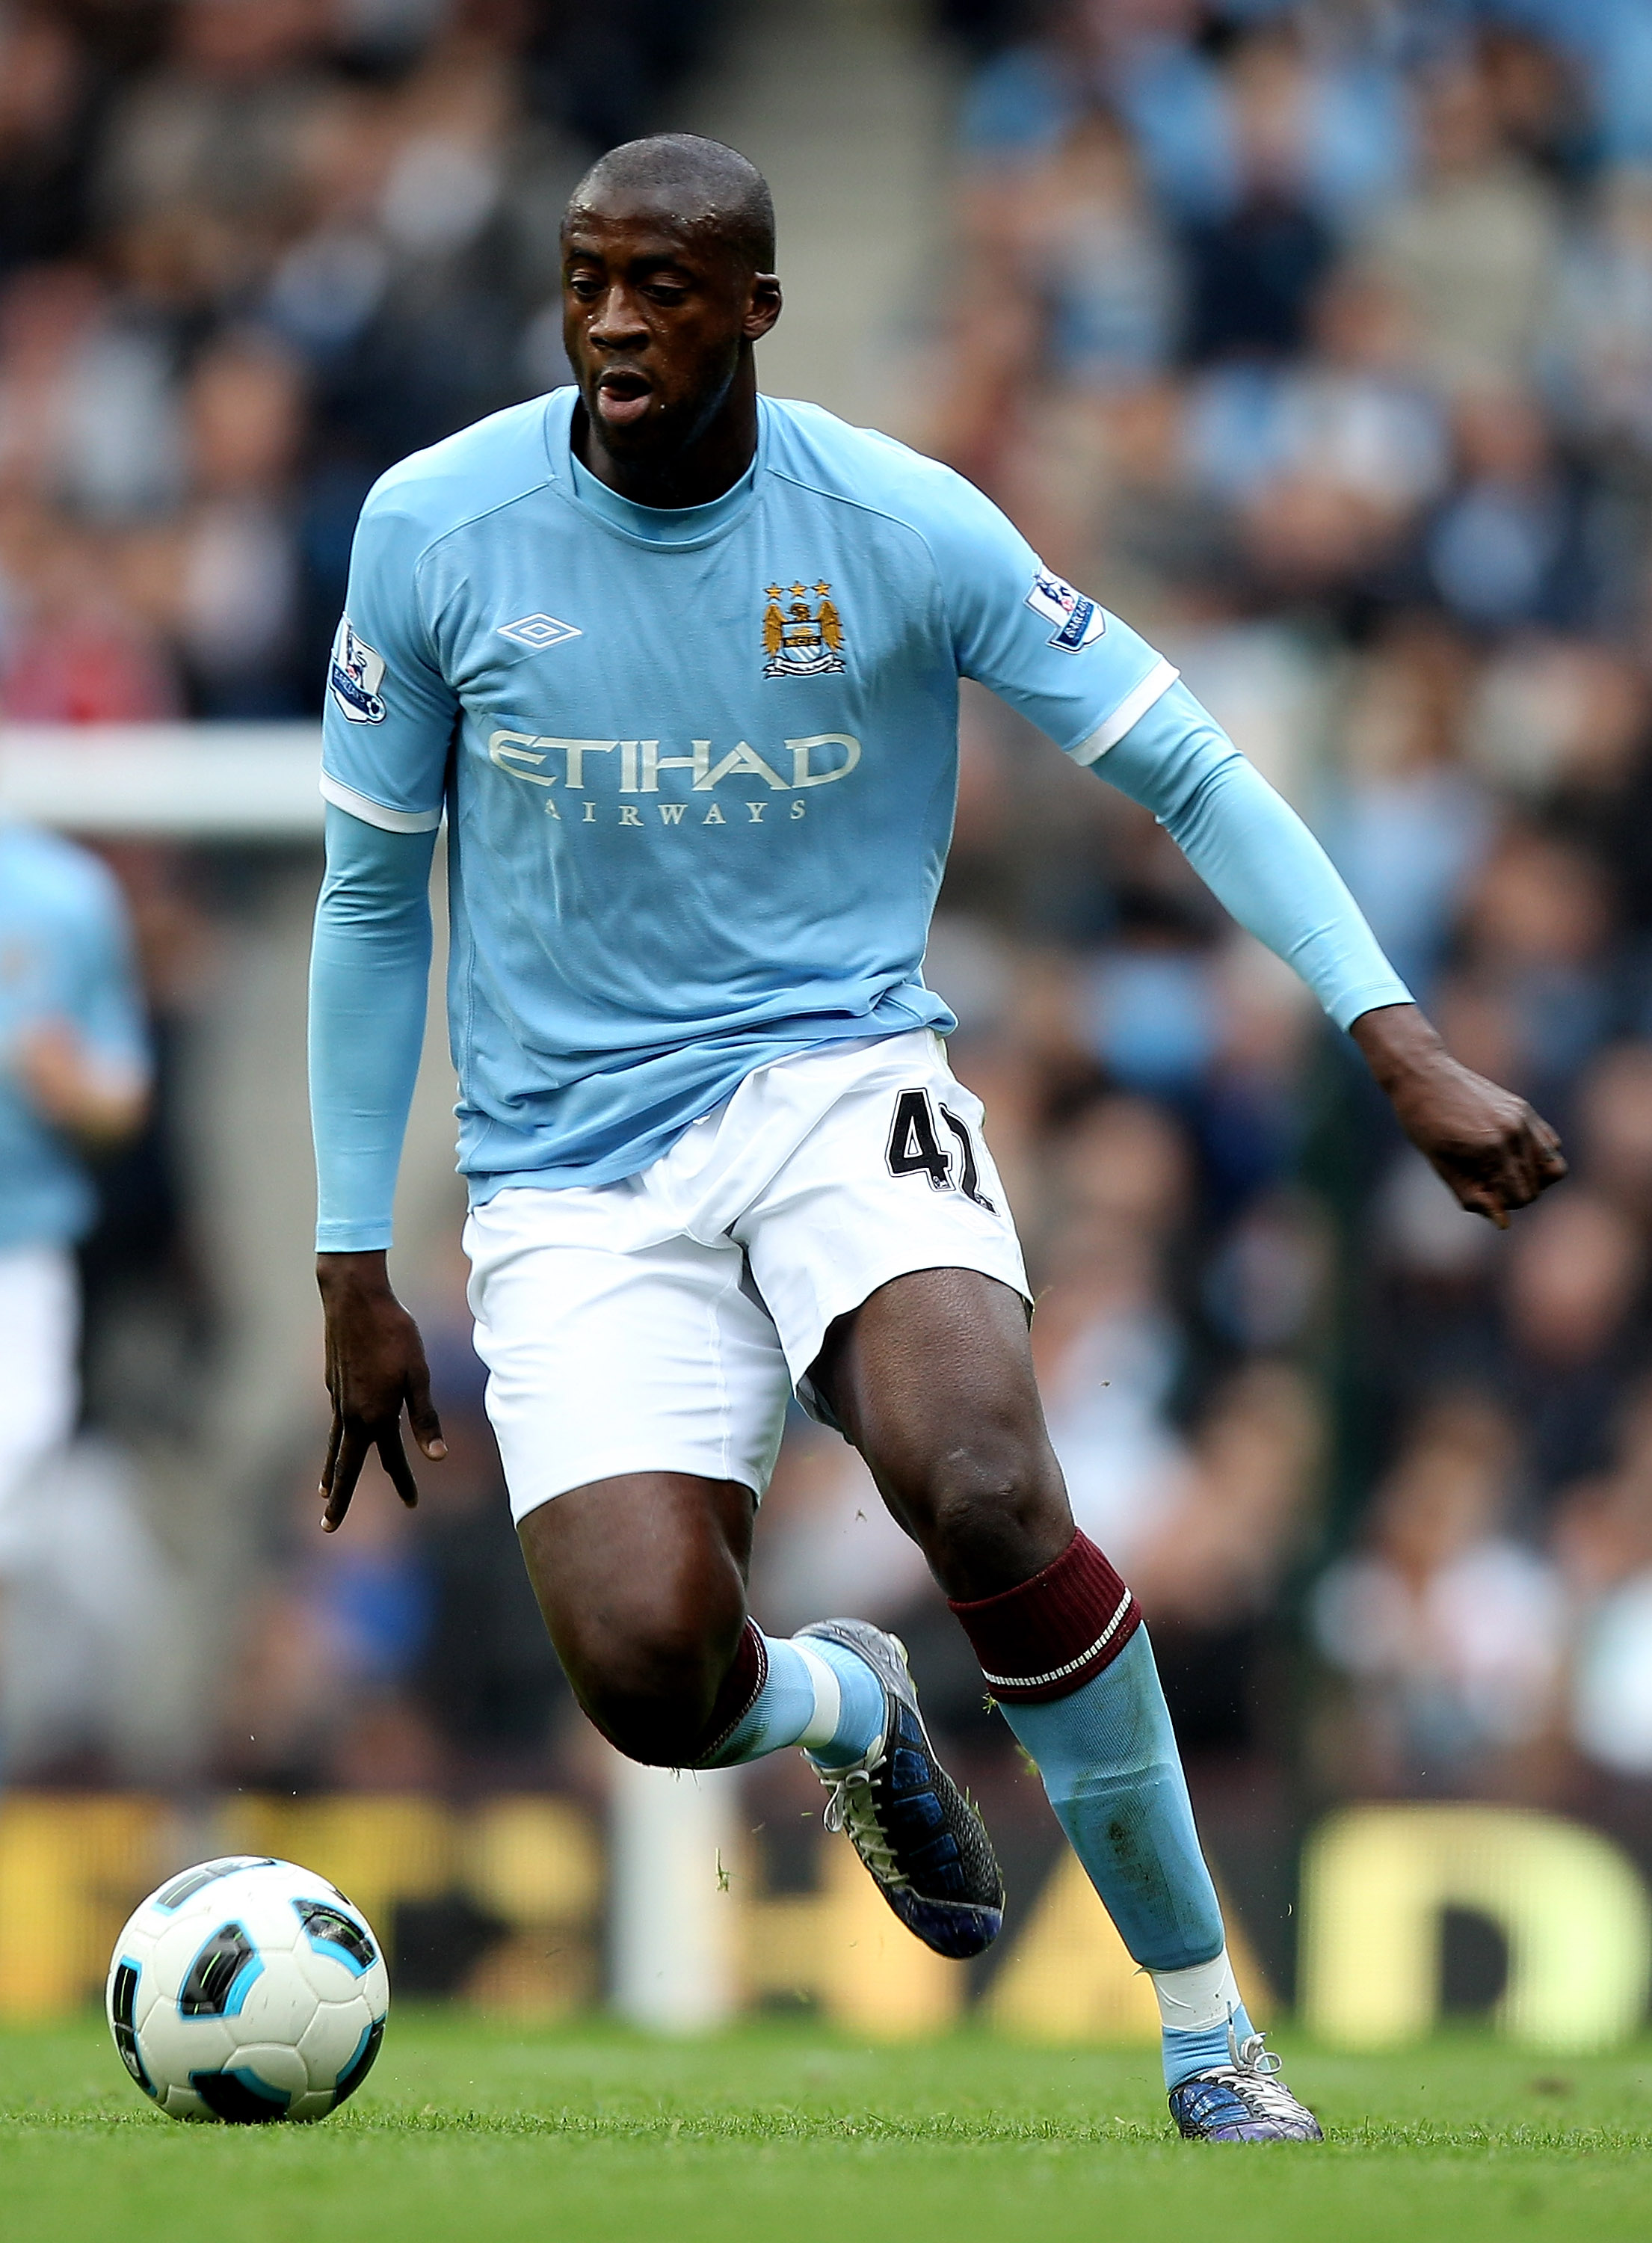 MANCHESTER, ENGLAND - SEPTEMBER 25:   Yaya Toure of Manchester City in action during the Barclays Premier League match between Manchester City and Chelsea at the City of Manchester Stadium on September 25, 2010 in Manchester, England.  (Photo by Michael S